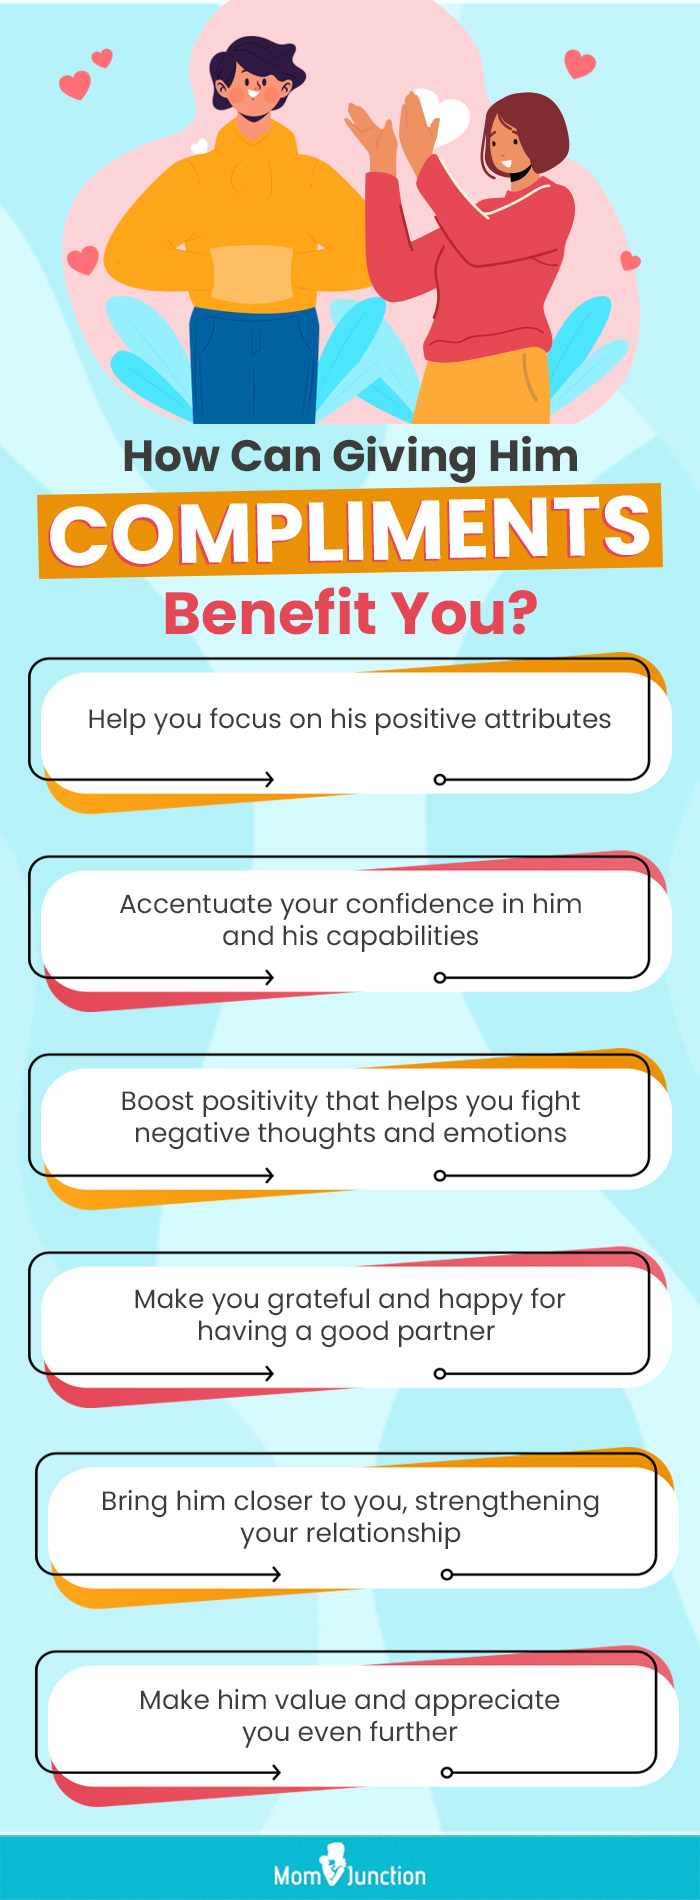 advantages of giving compliments for you (infographic)